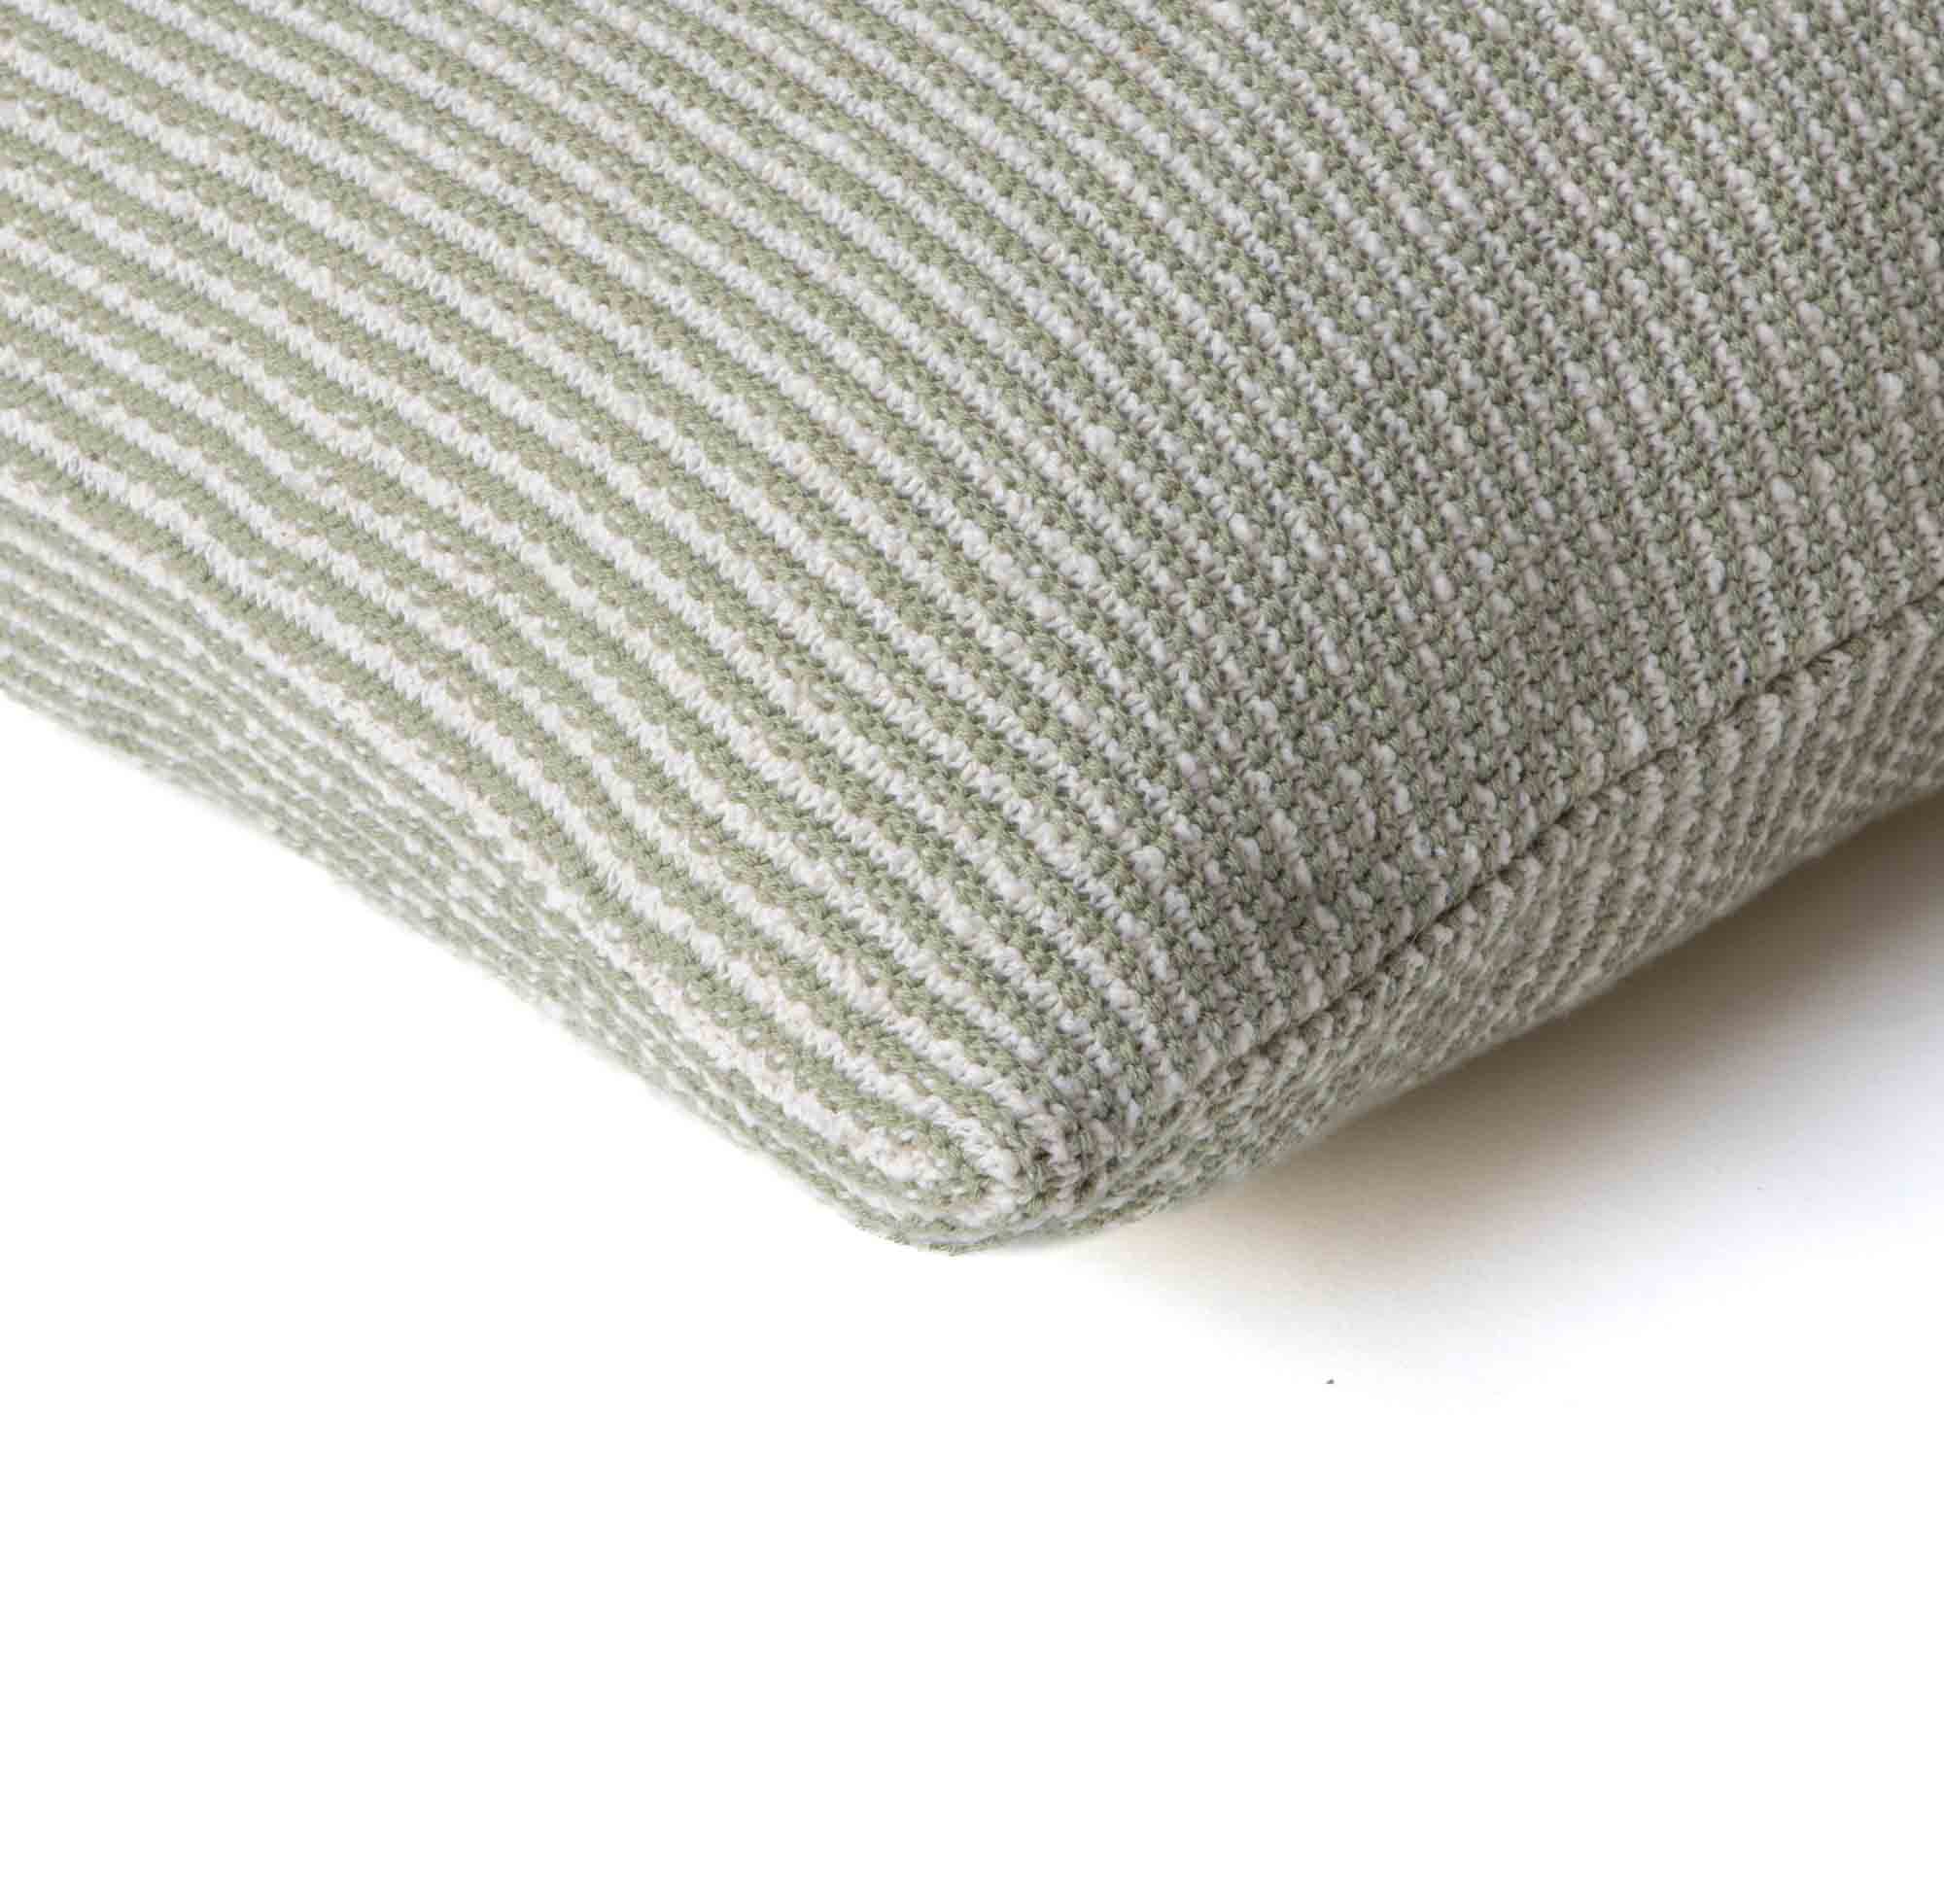 Speckled Knit Cushion Cover - Dusty Green